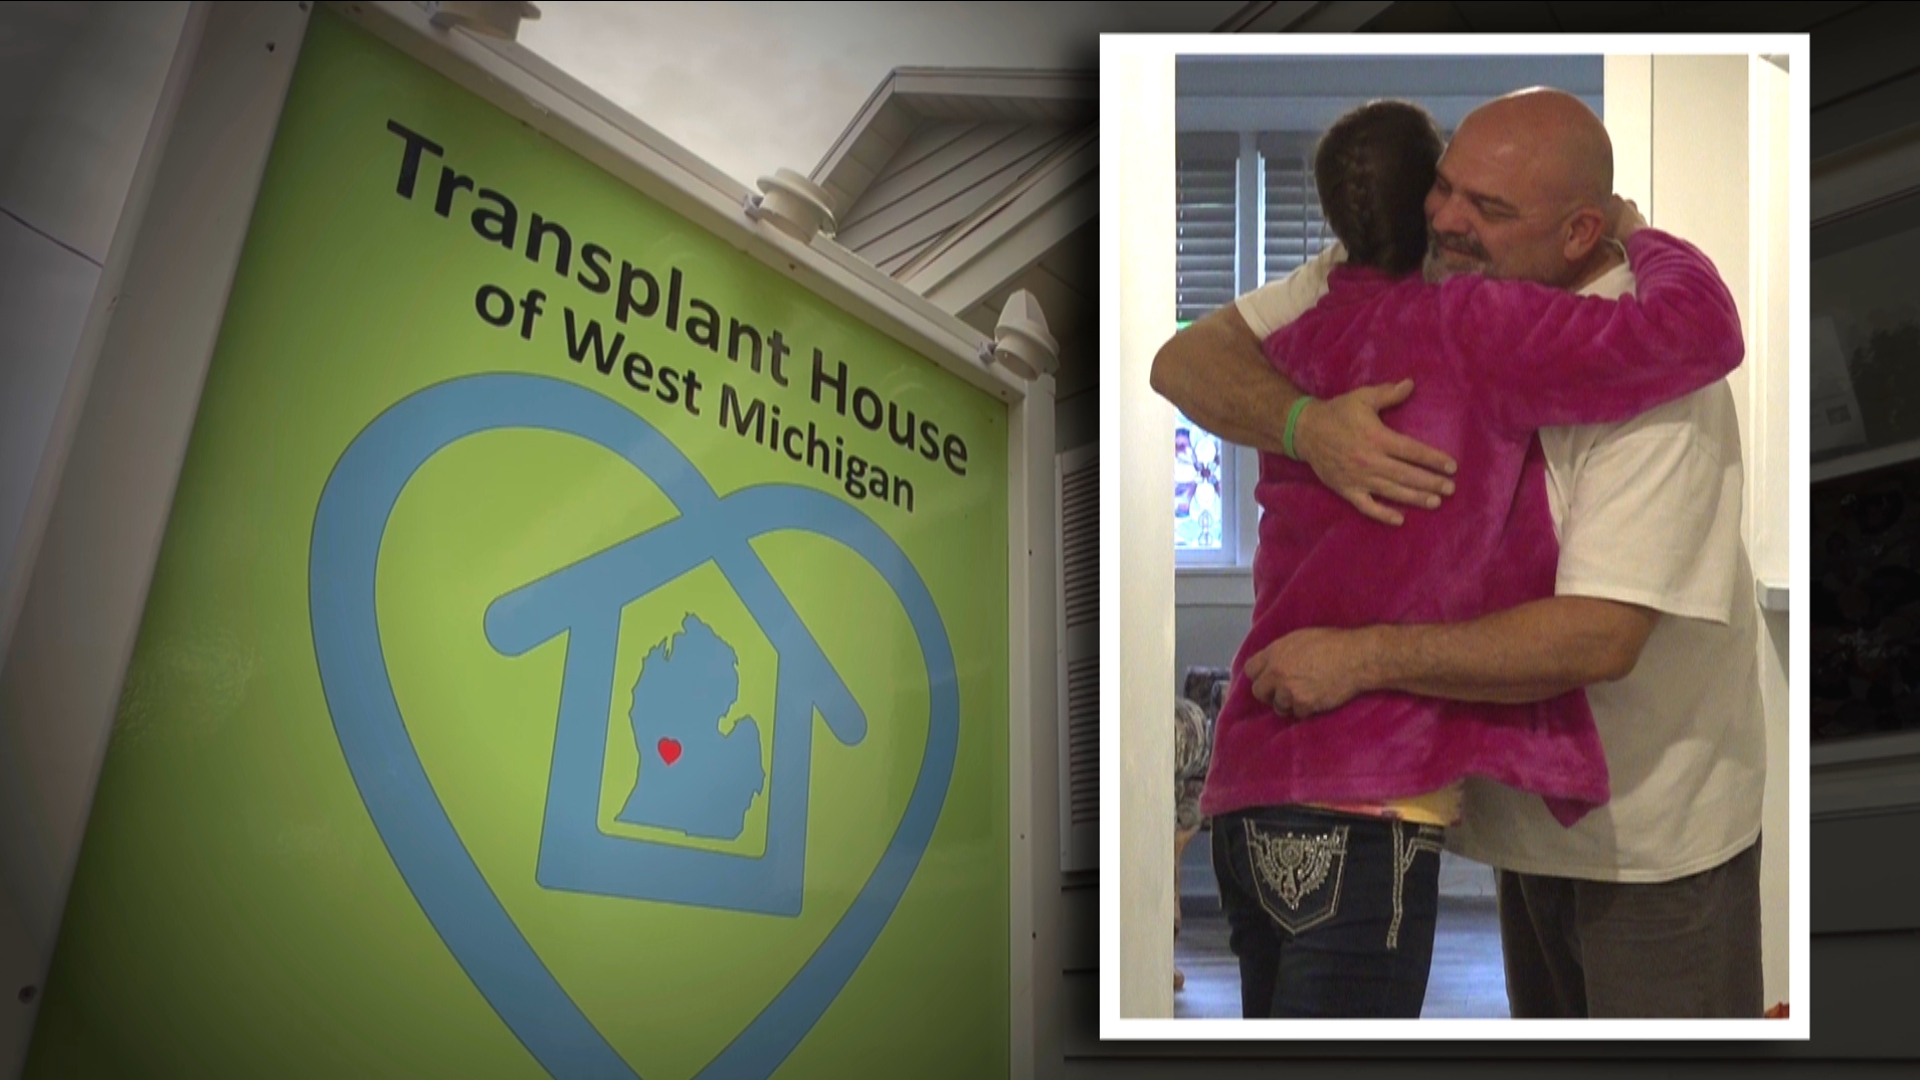 Inspired by their own transplant journeys, Tracy Gary and Holly Werlein-Gary opened a home for patients and their families.